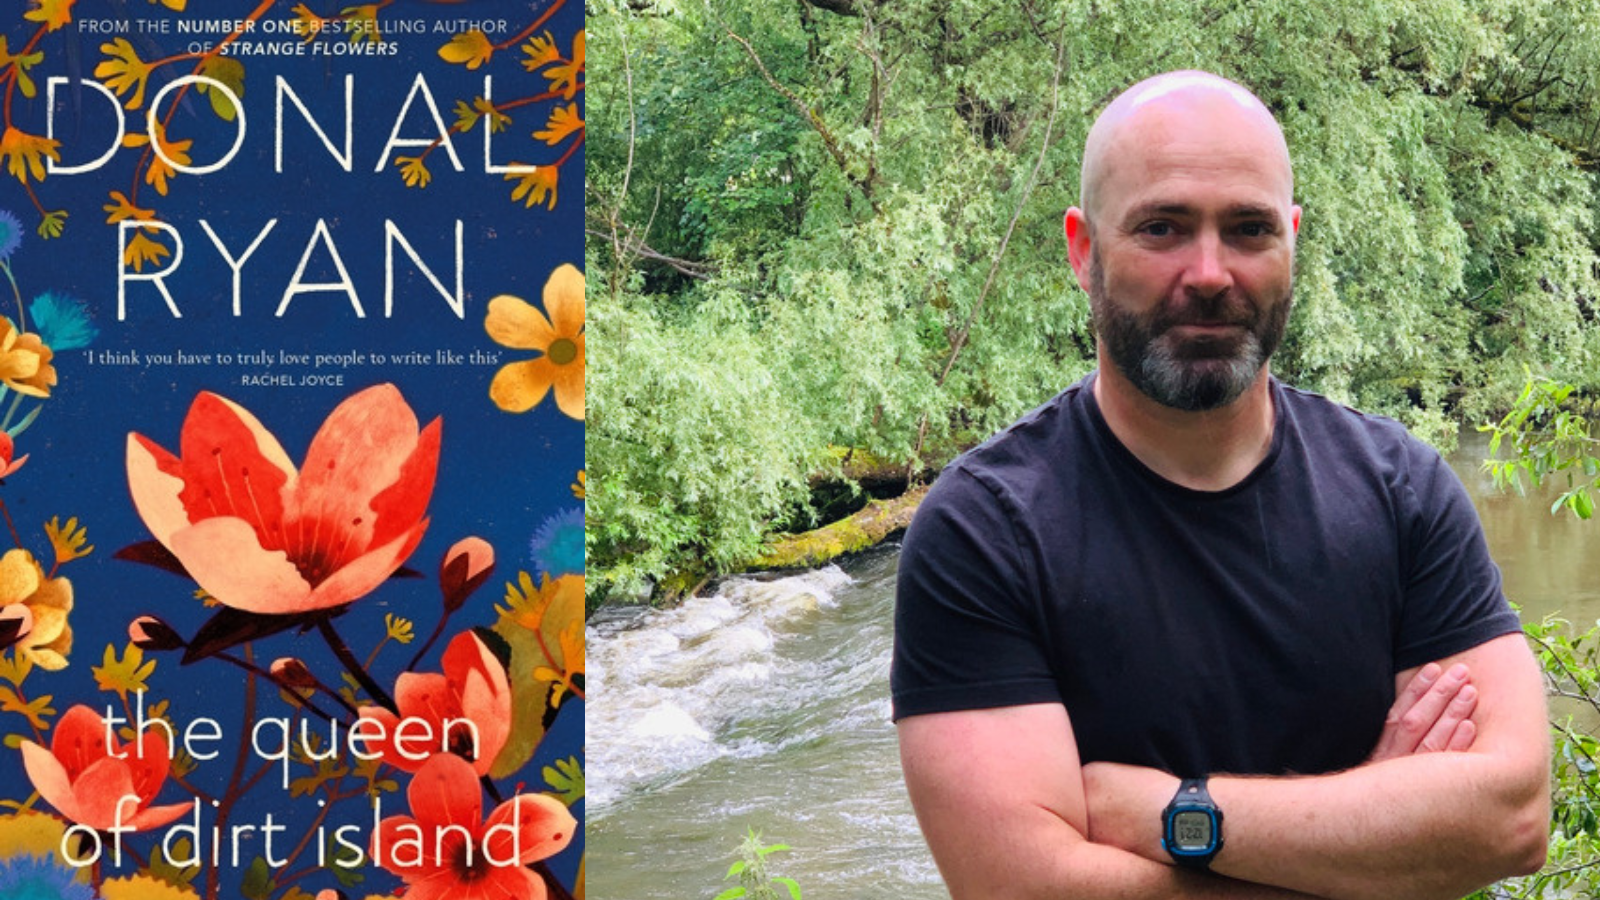 author donal ryan and image of his book cover